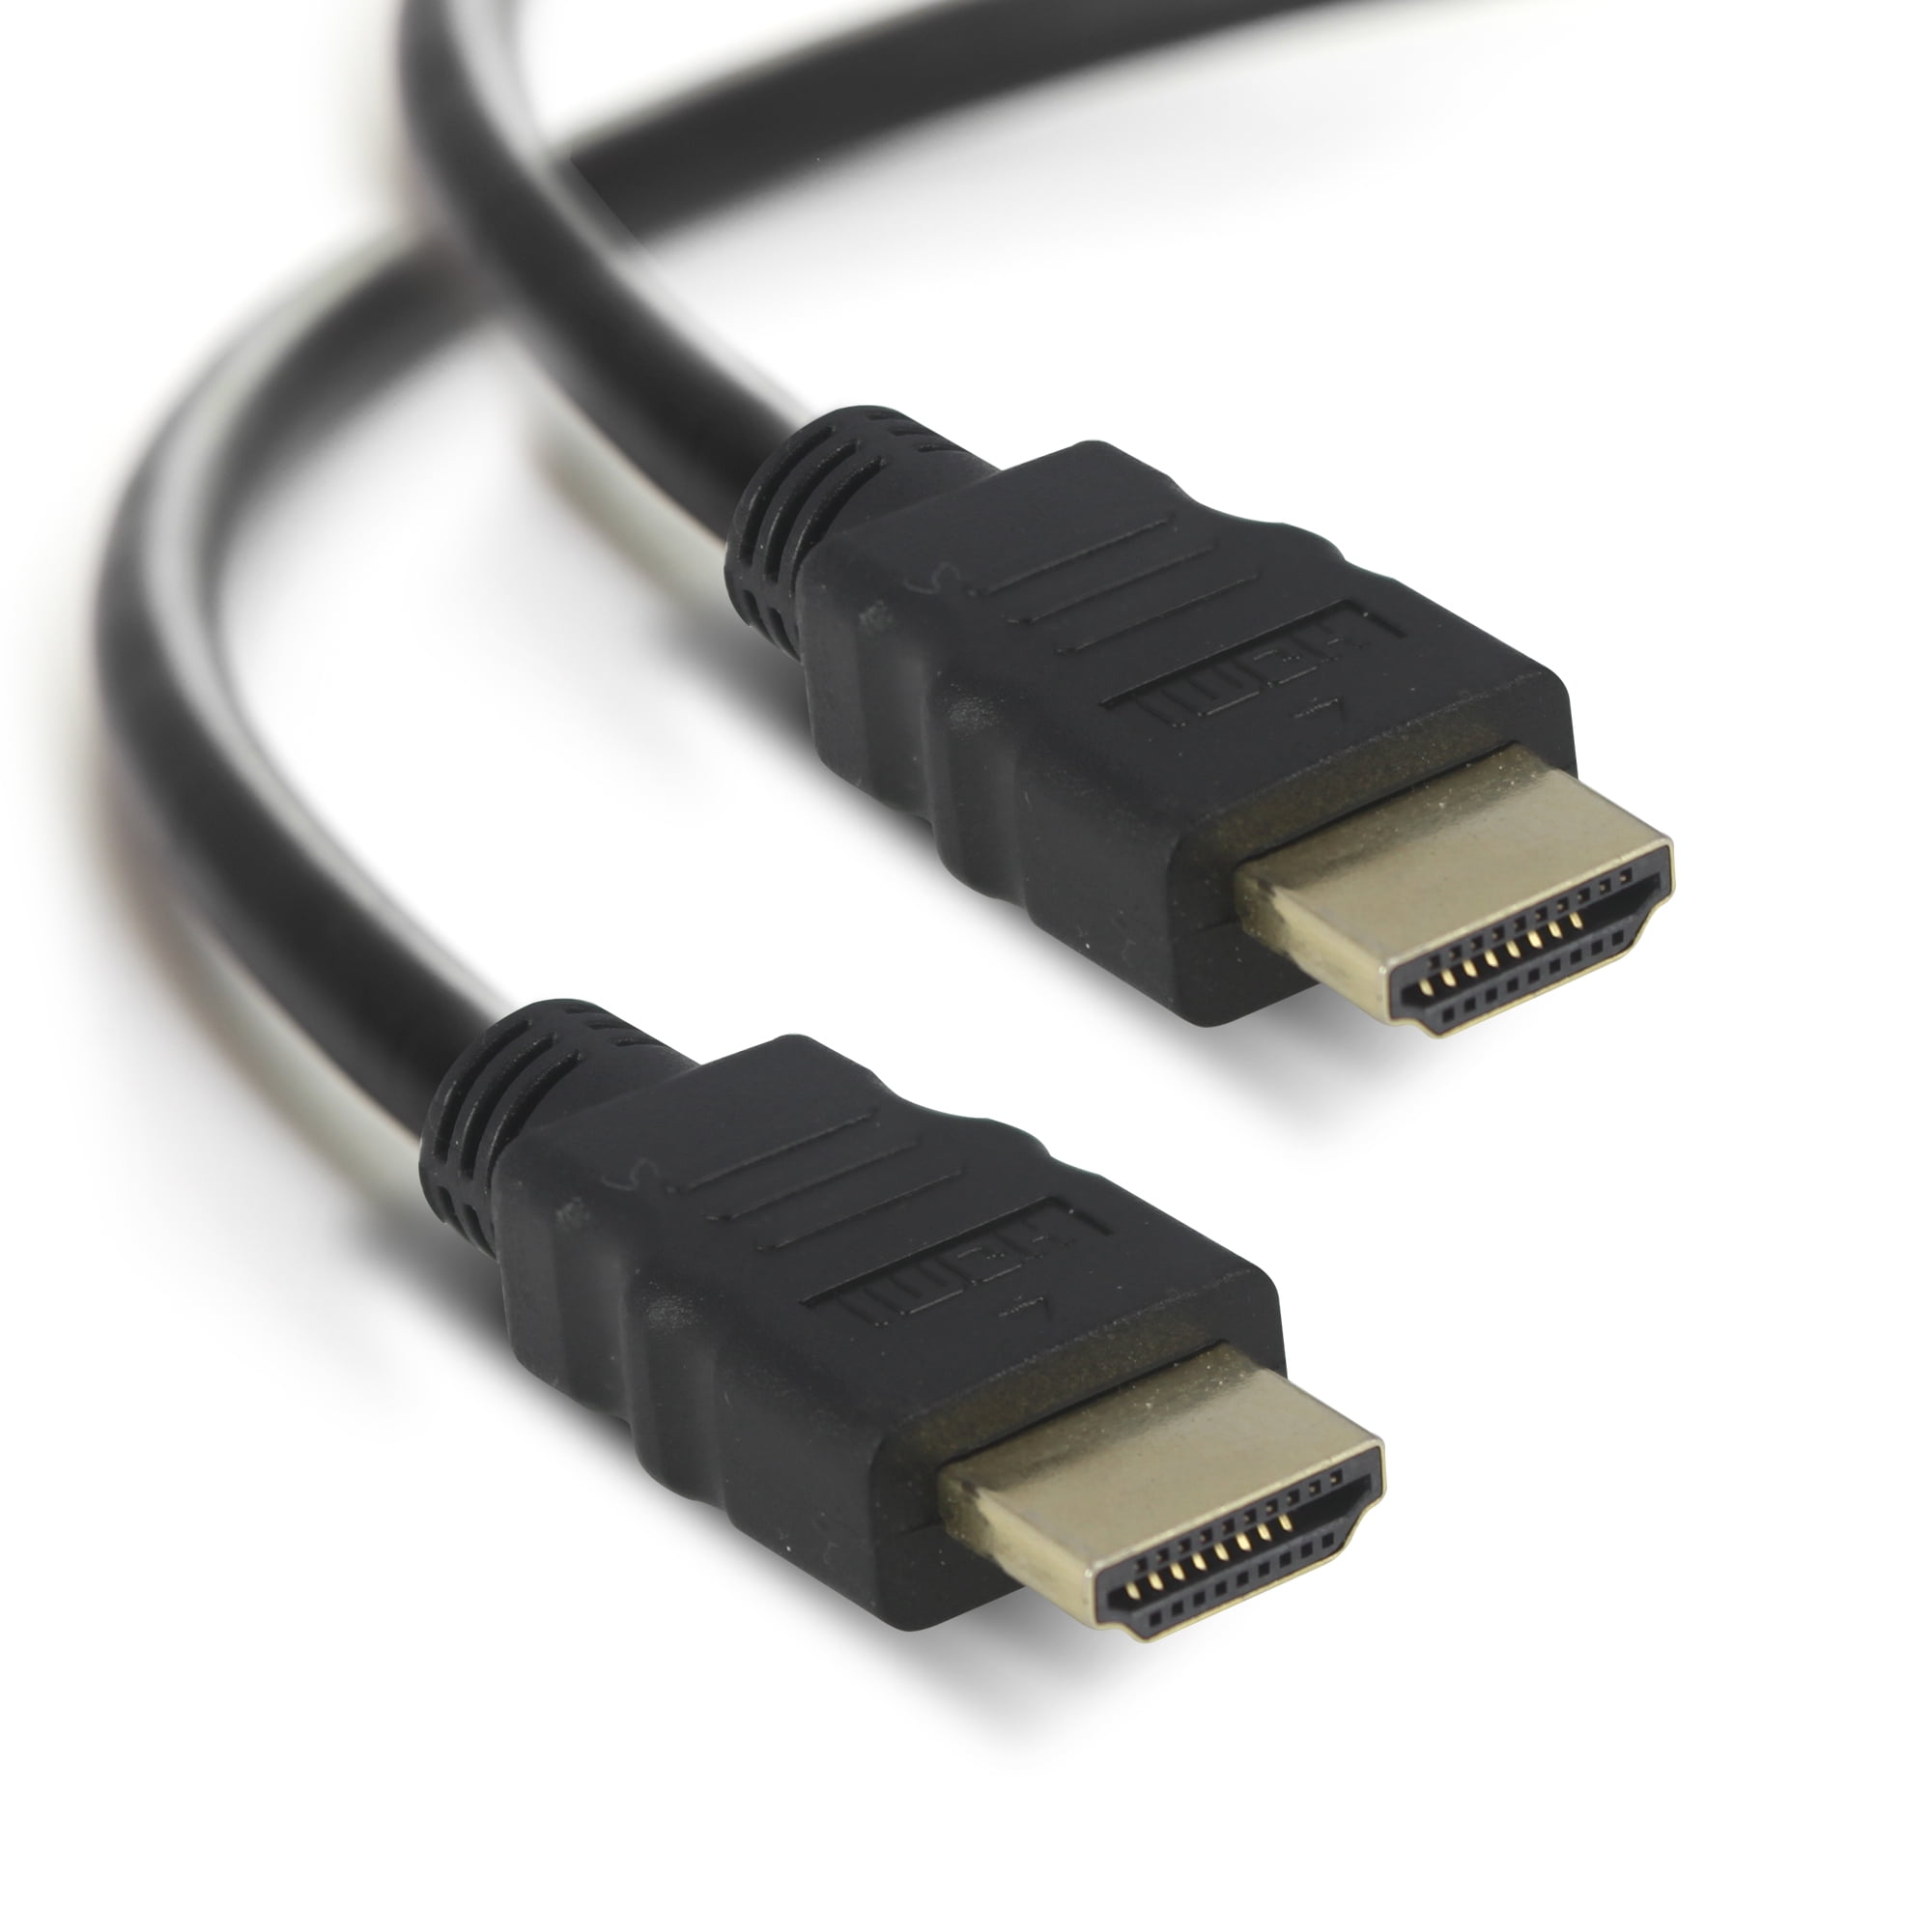 HDMI Cable with Ethernet. HDMI кабель dell. HDMI High Speed. HDMI кабель Wasp. Hdmi support